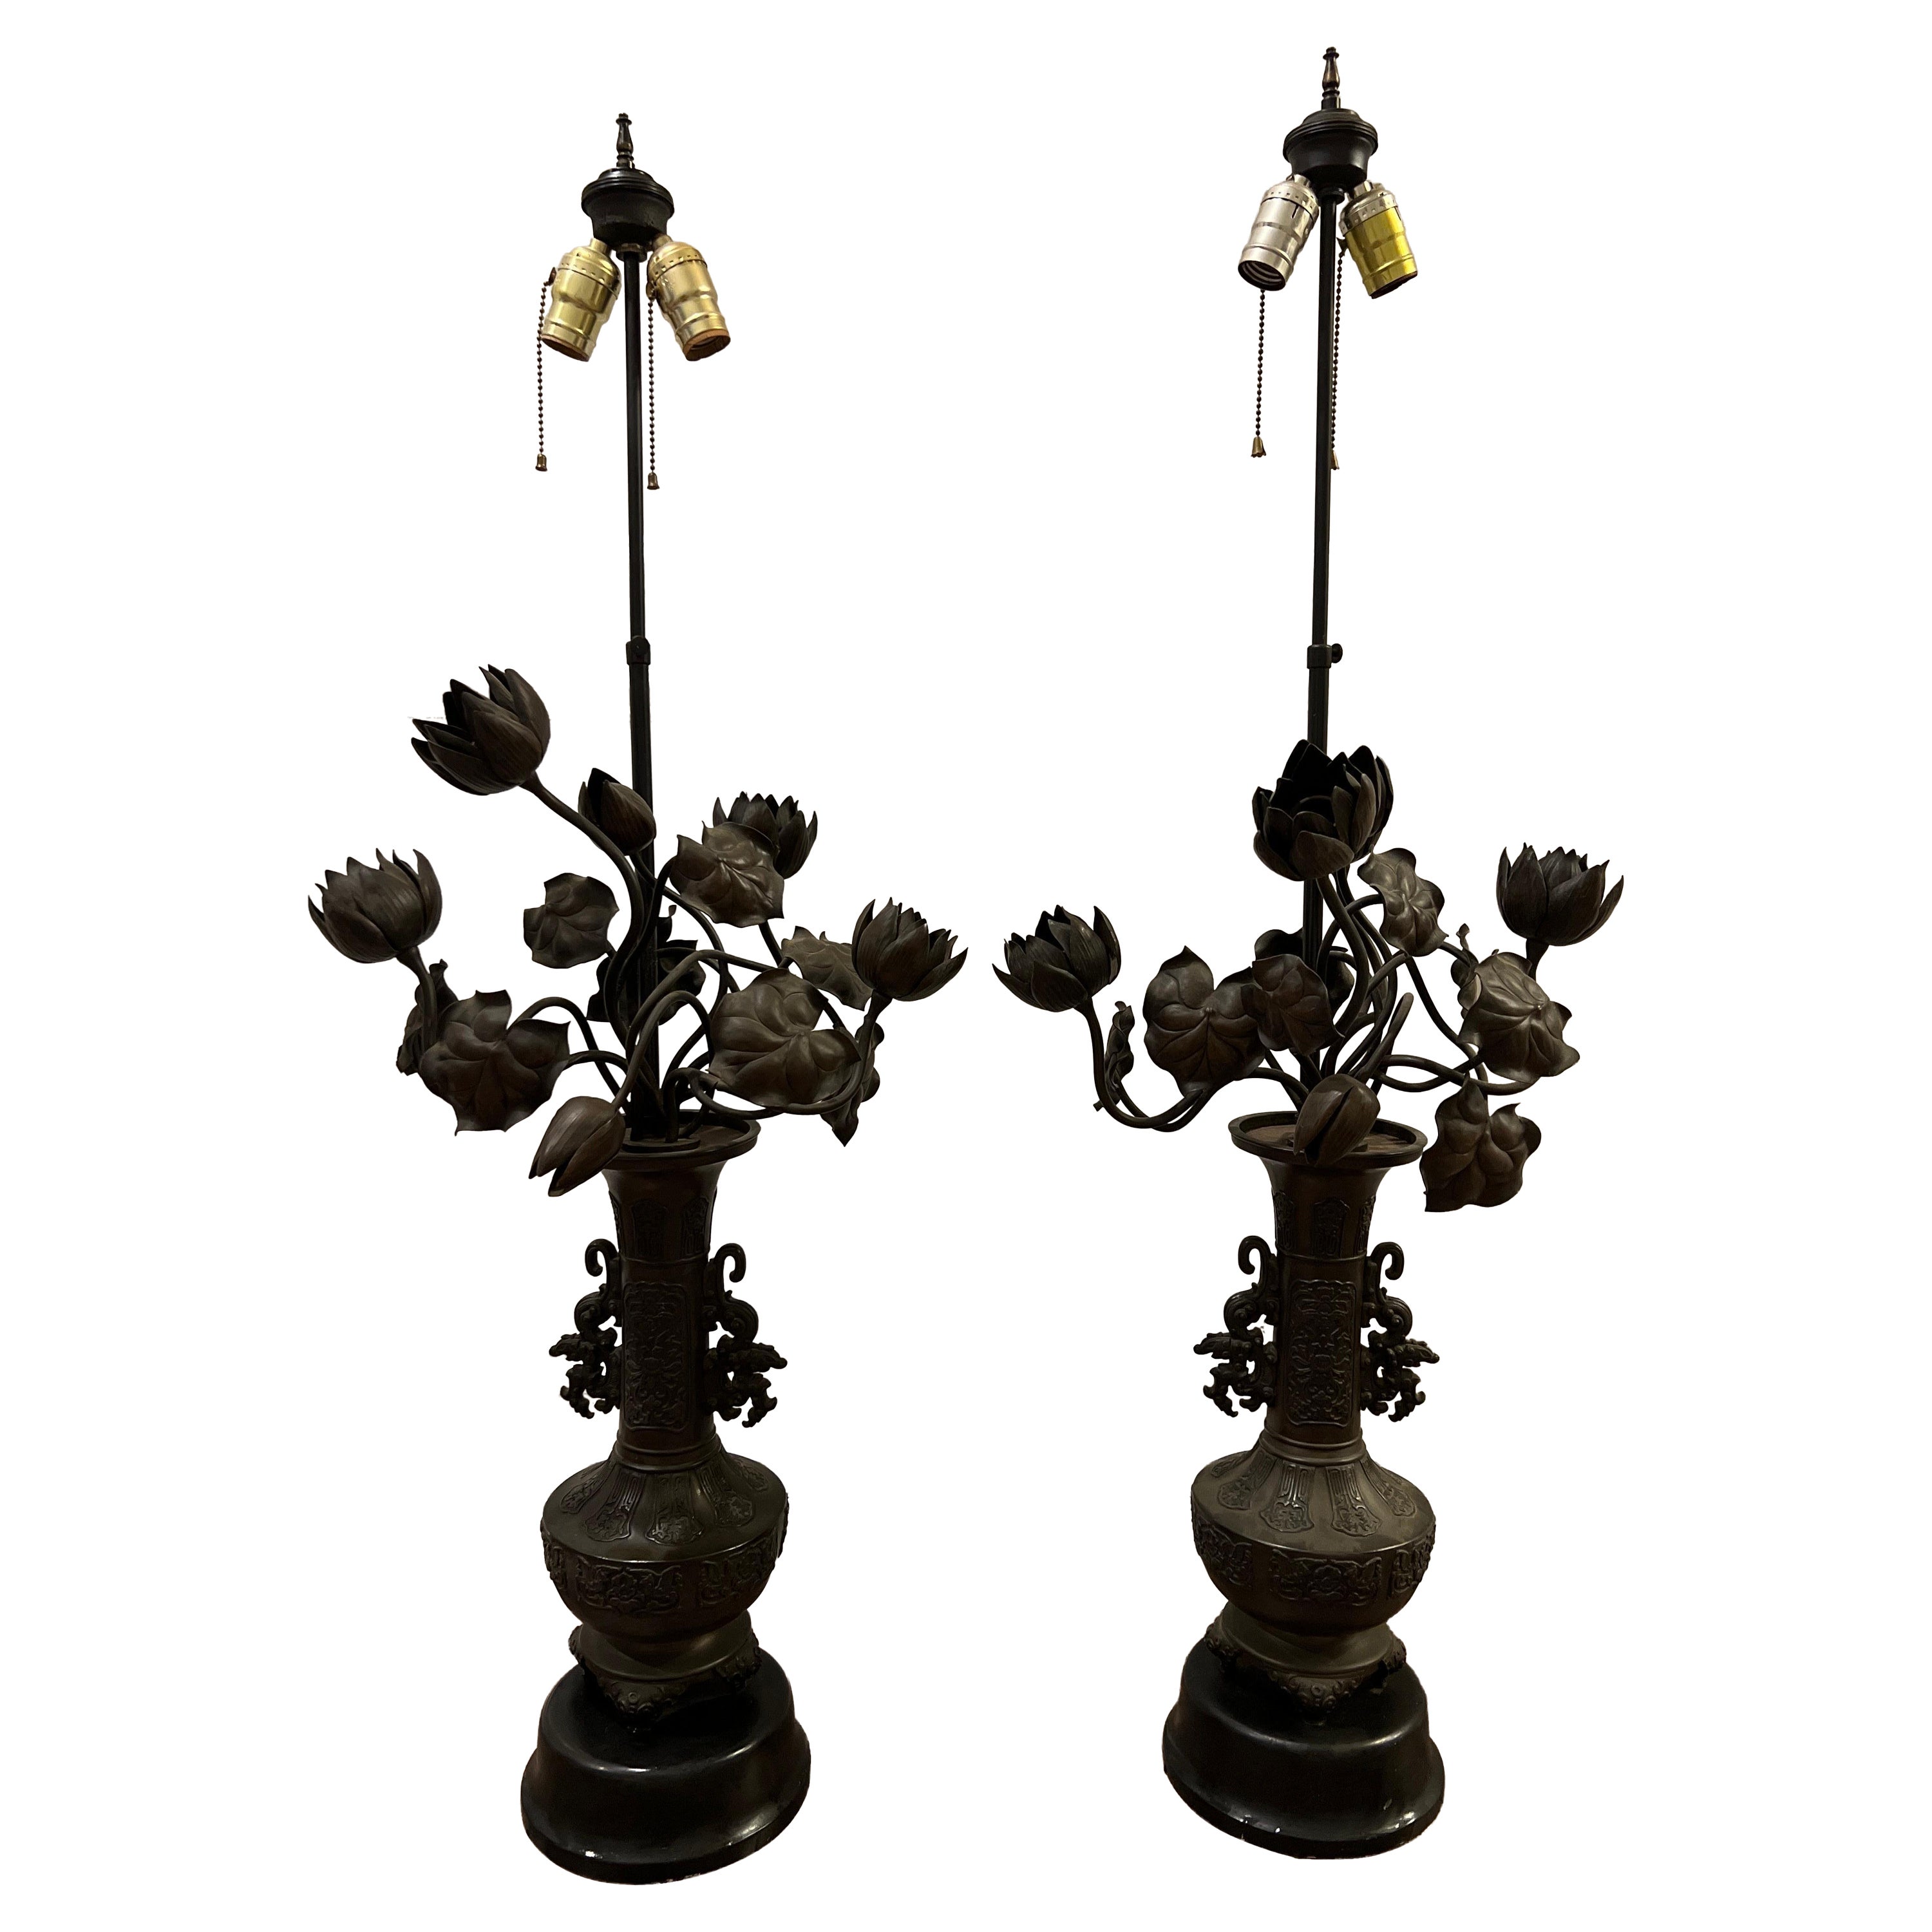 Large Scale Meiji Japanese Bronze Table Lamp W/ Floral Candelabra Mounts For Sale